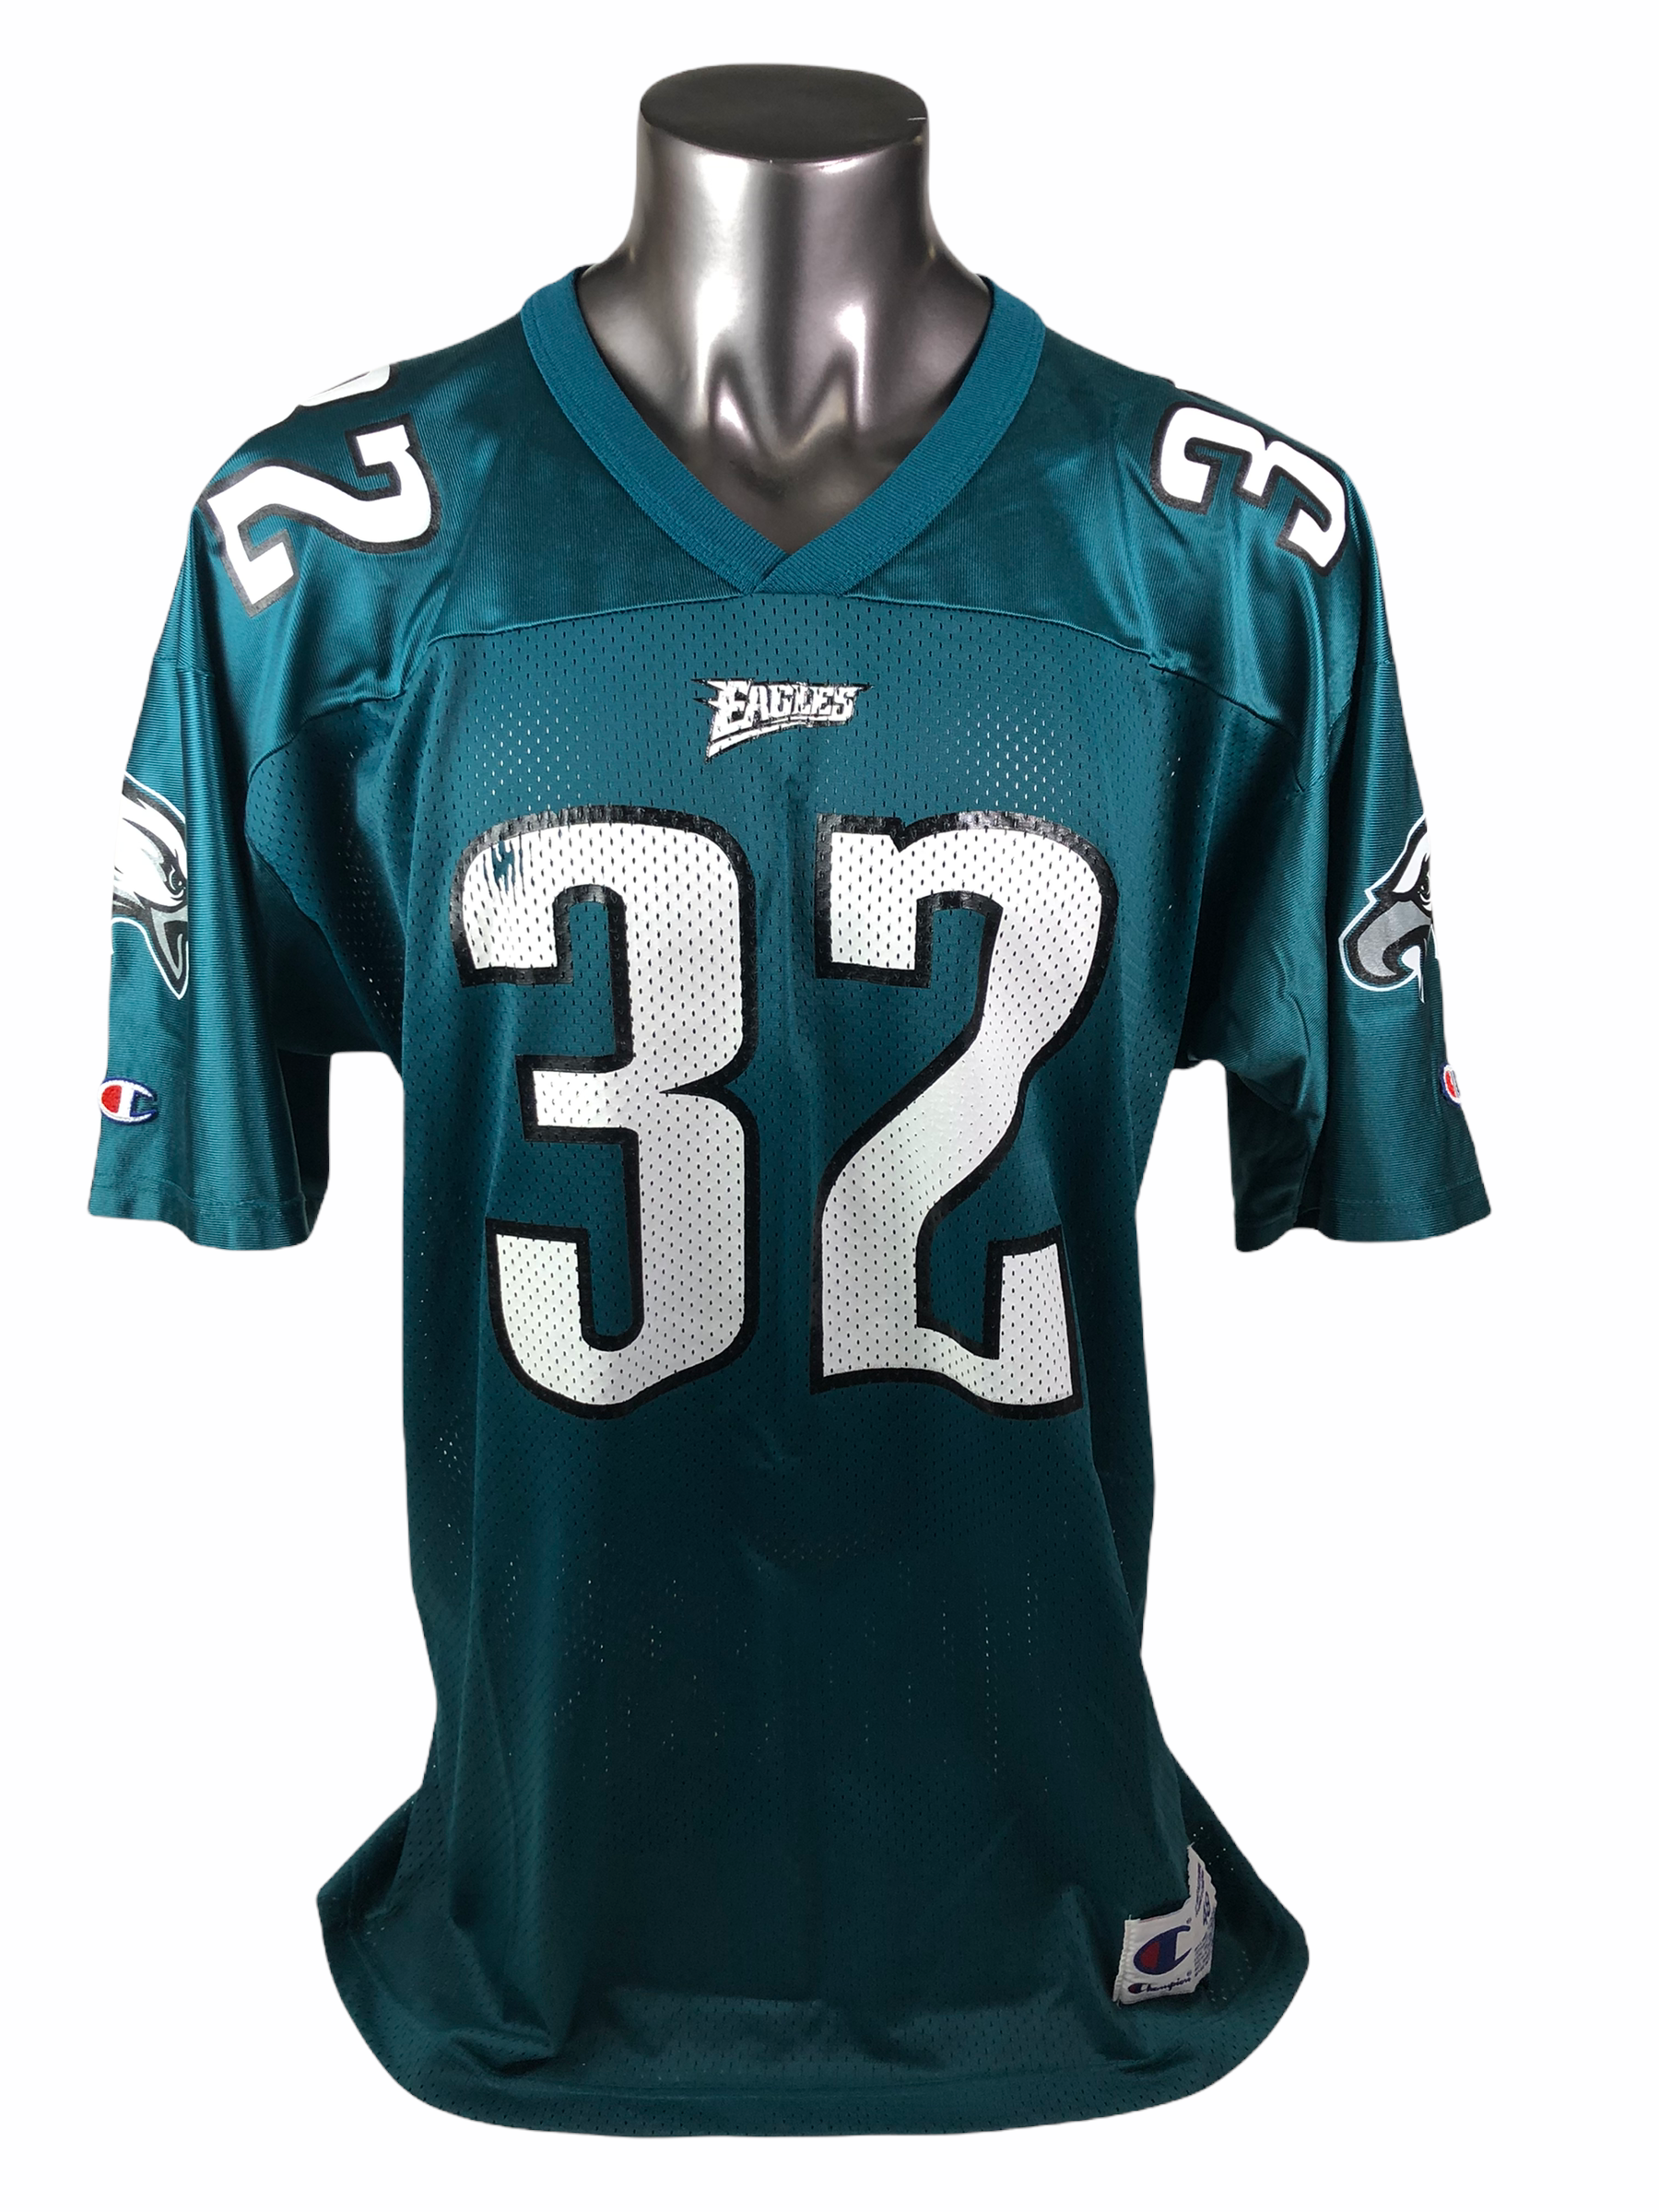 Philadelphia Eagles Baseball Jersey - clothing & accessories - by